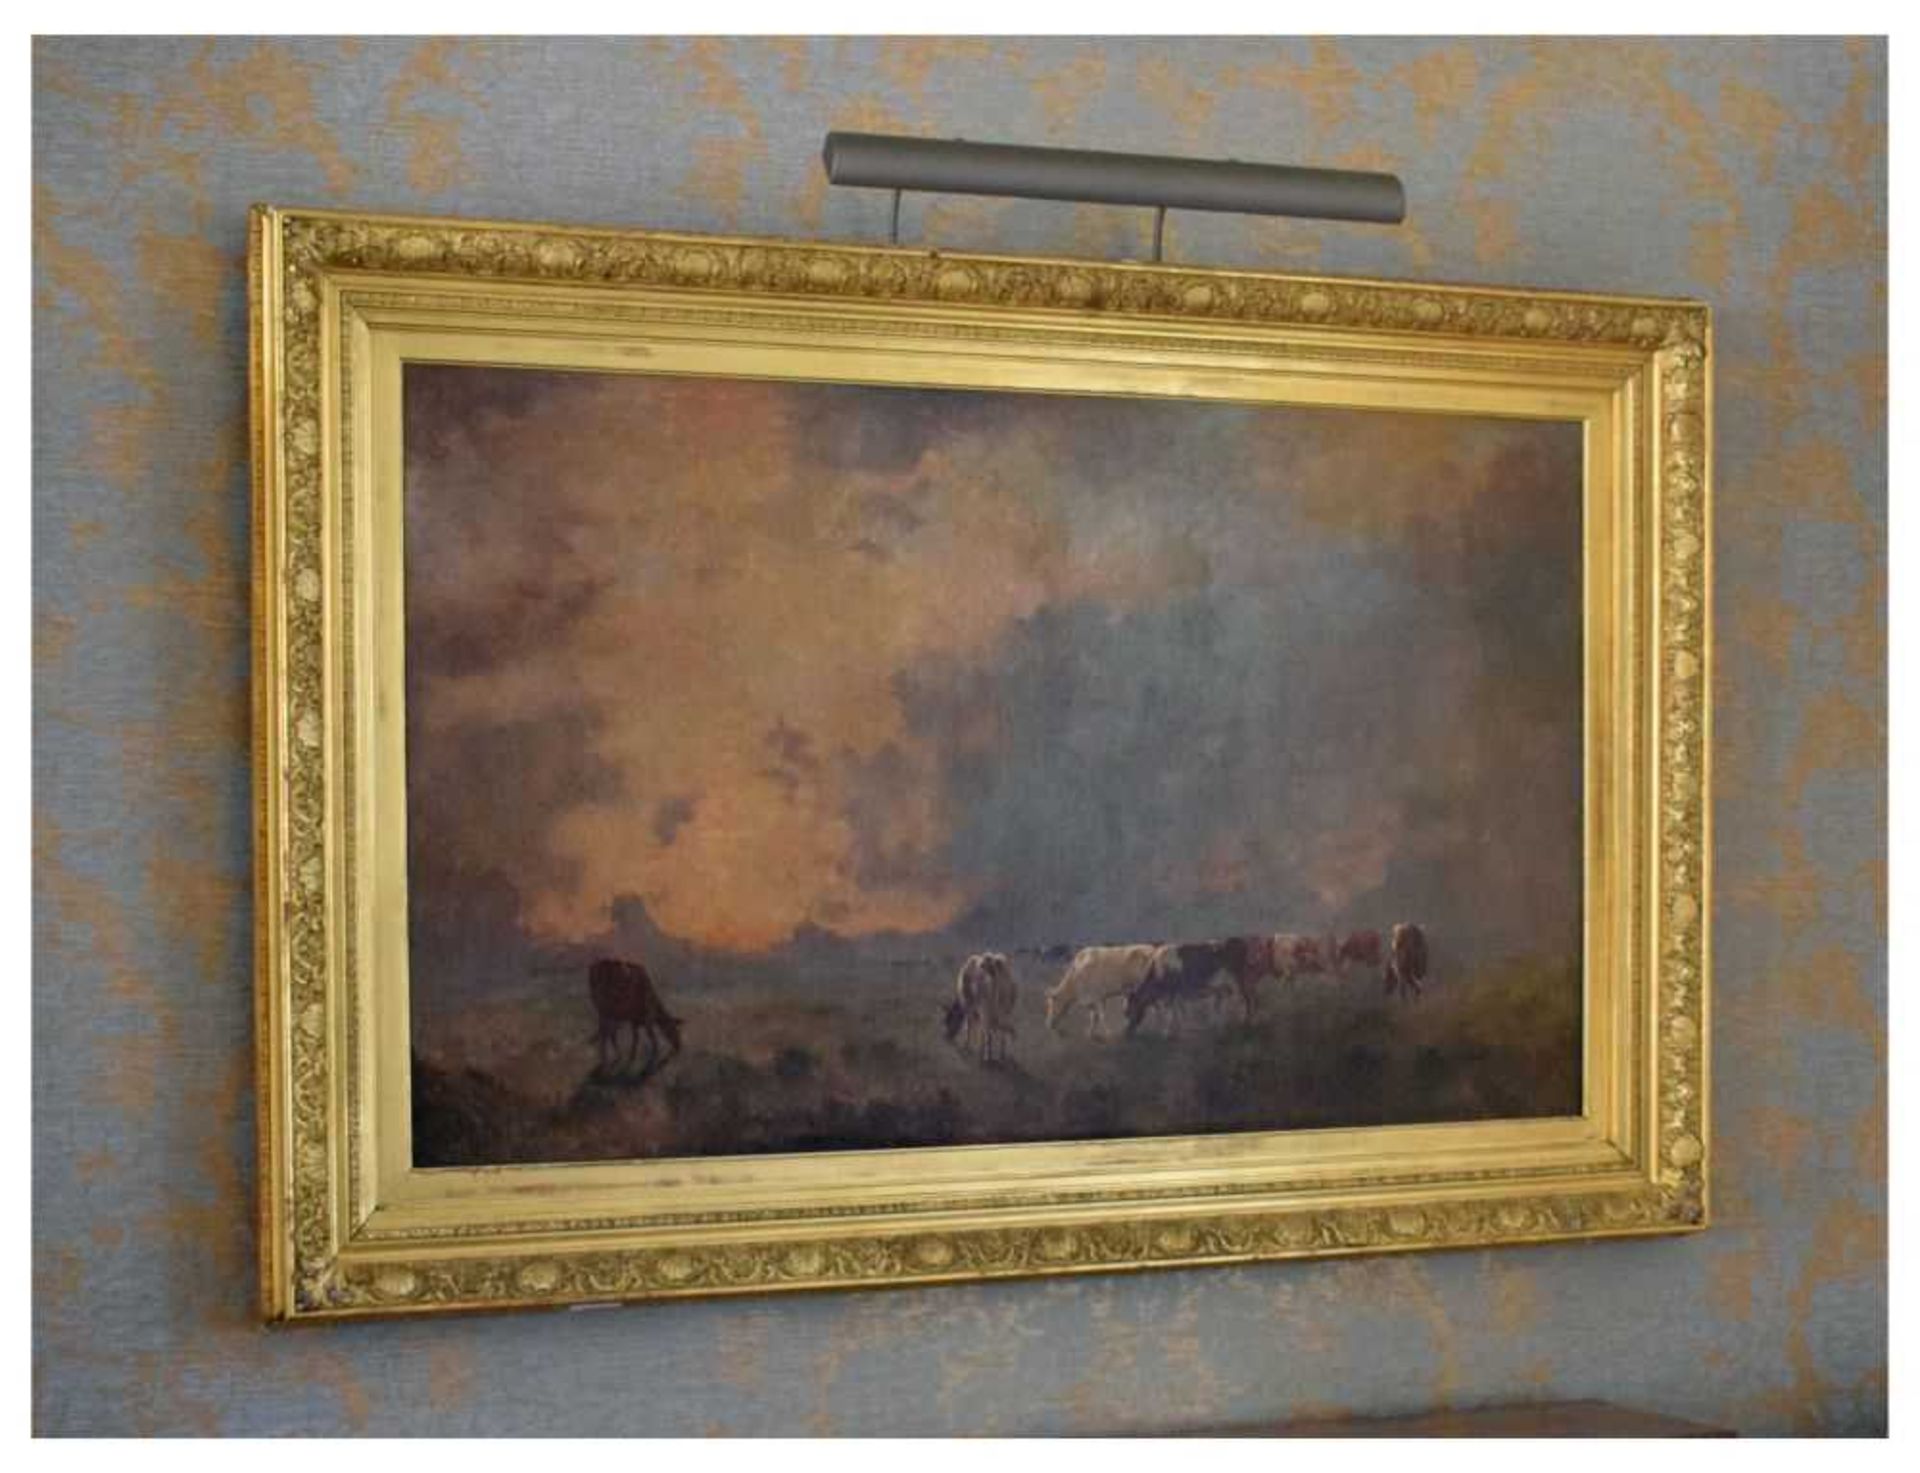 Manner of William Frederick Hulk, (1852-1906) - Oil on canvas - Cattle grazing - Image 2 of 10